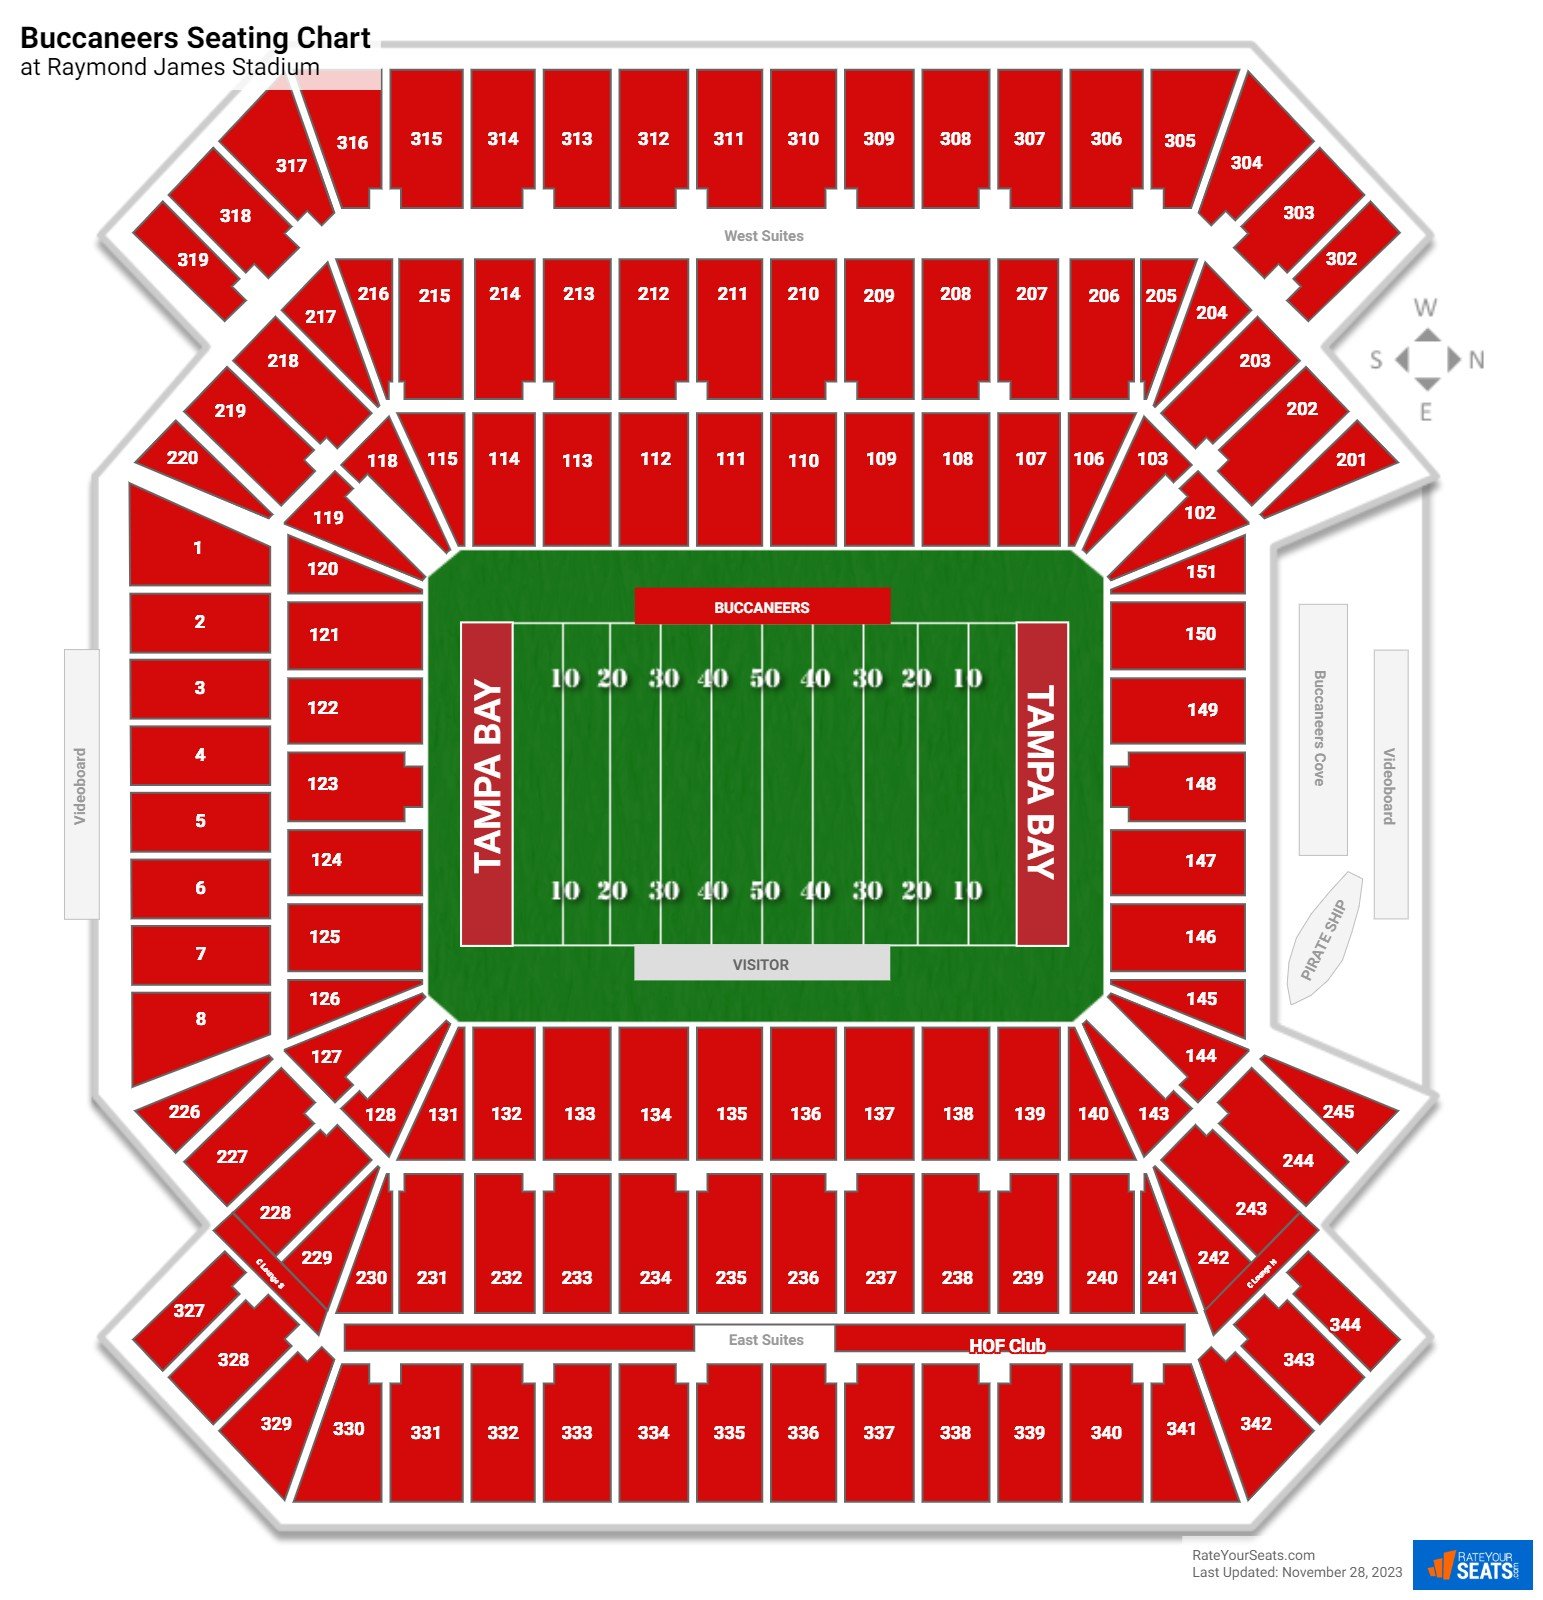 tampa bucs game tickets